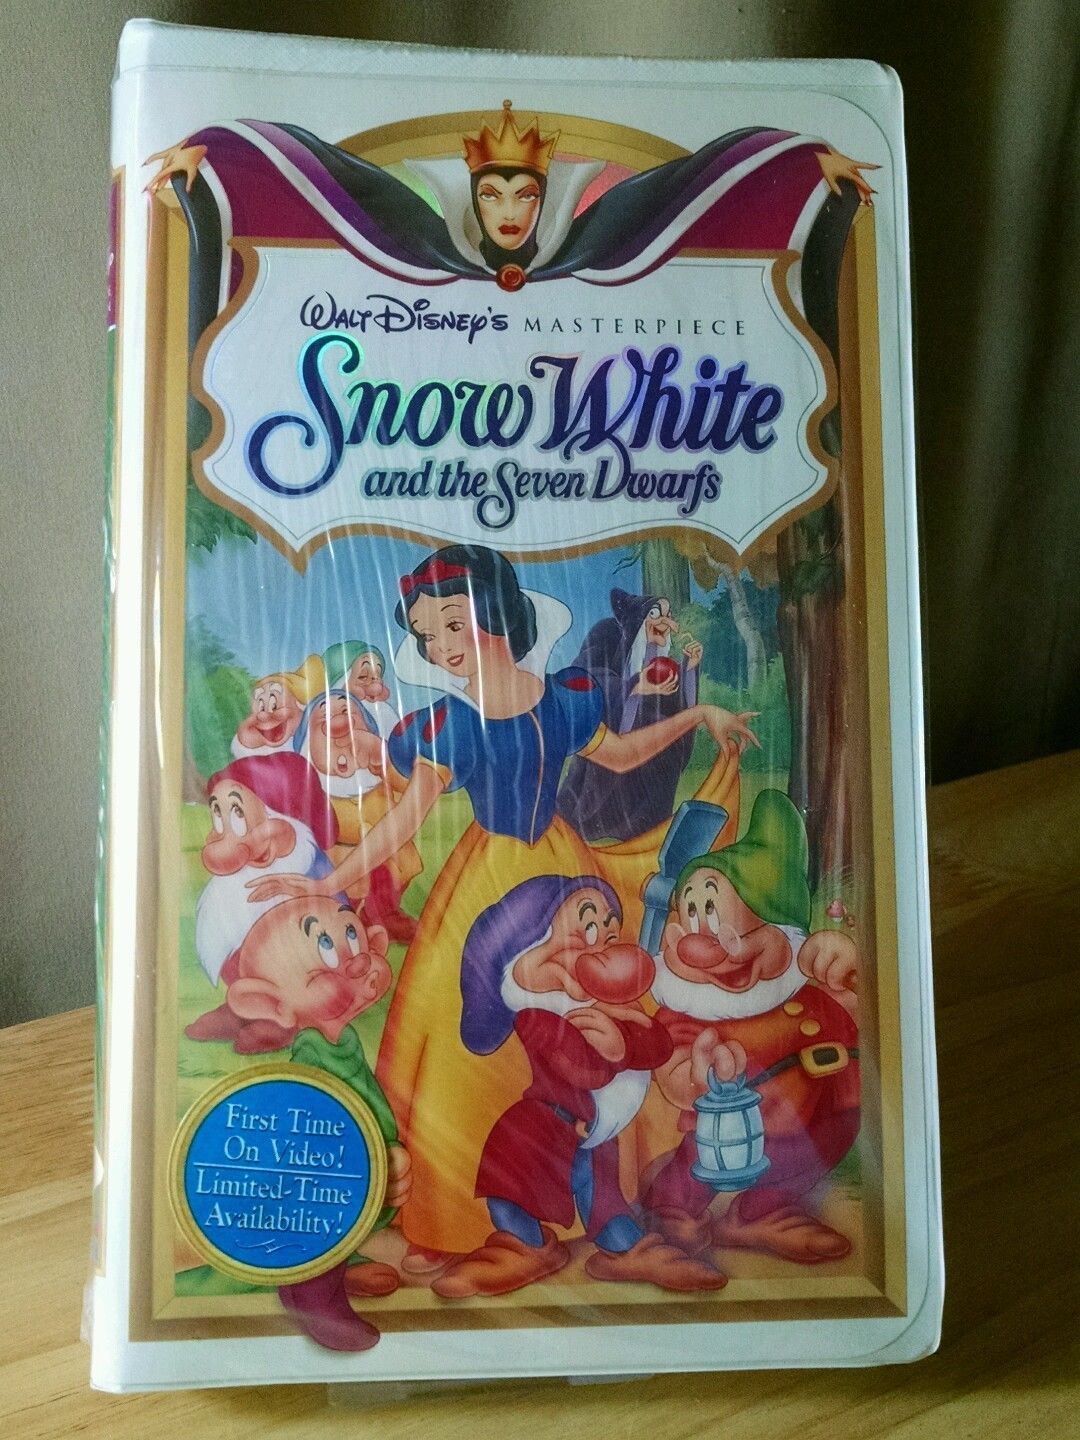 Vhs Snow White And The Seven Dwarfs Disney Masterpiece Collection Sealed Vhs Tapes 